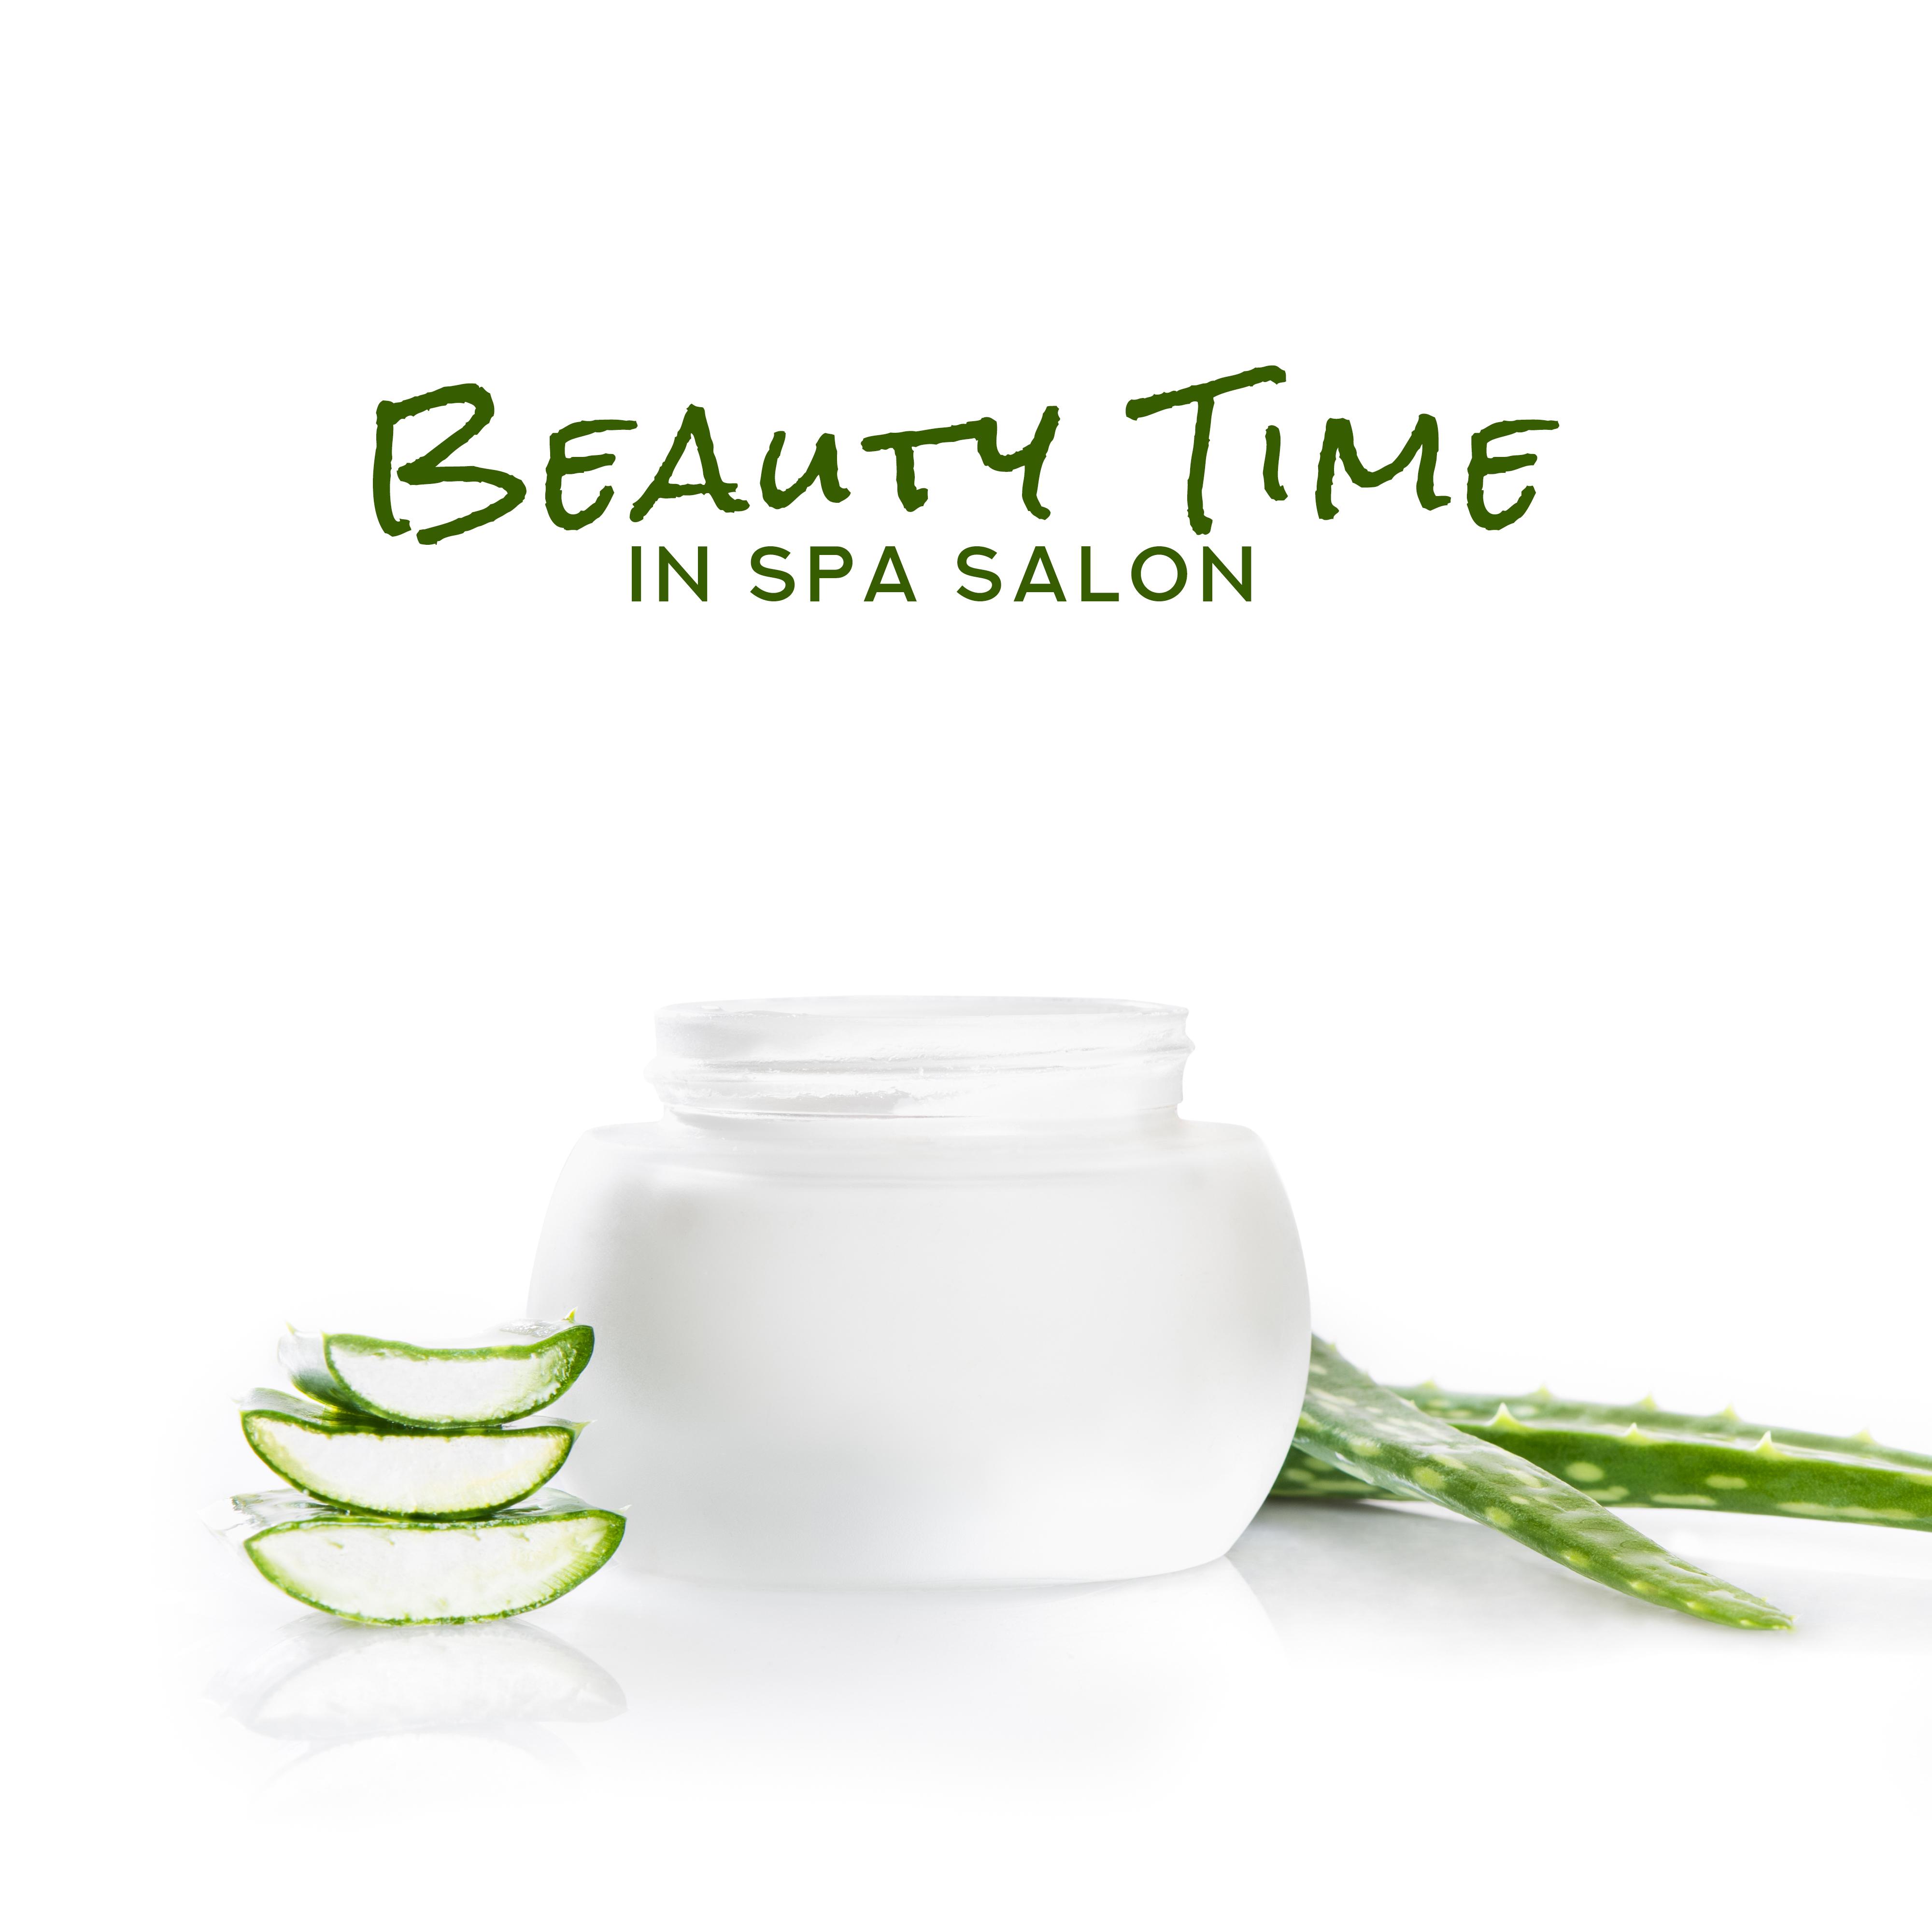 Beauty Time in Spa Salon: 2019 New Age Music for Spa & Wellness, Massage Therapy, Sauna, Bath, Songs with Piano Melodies and Sounds of Birds, Water & Nature